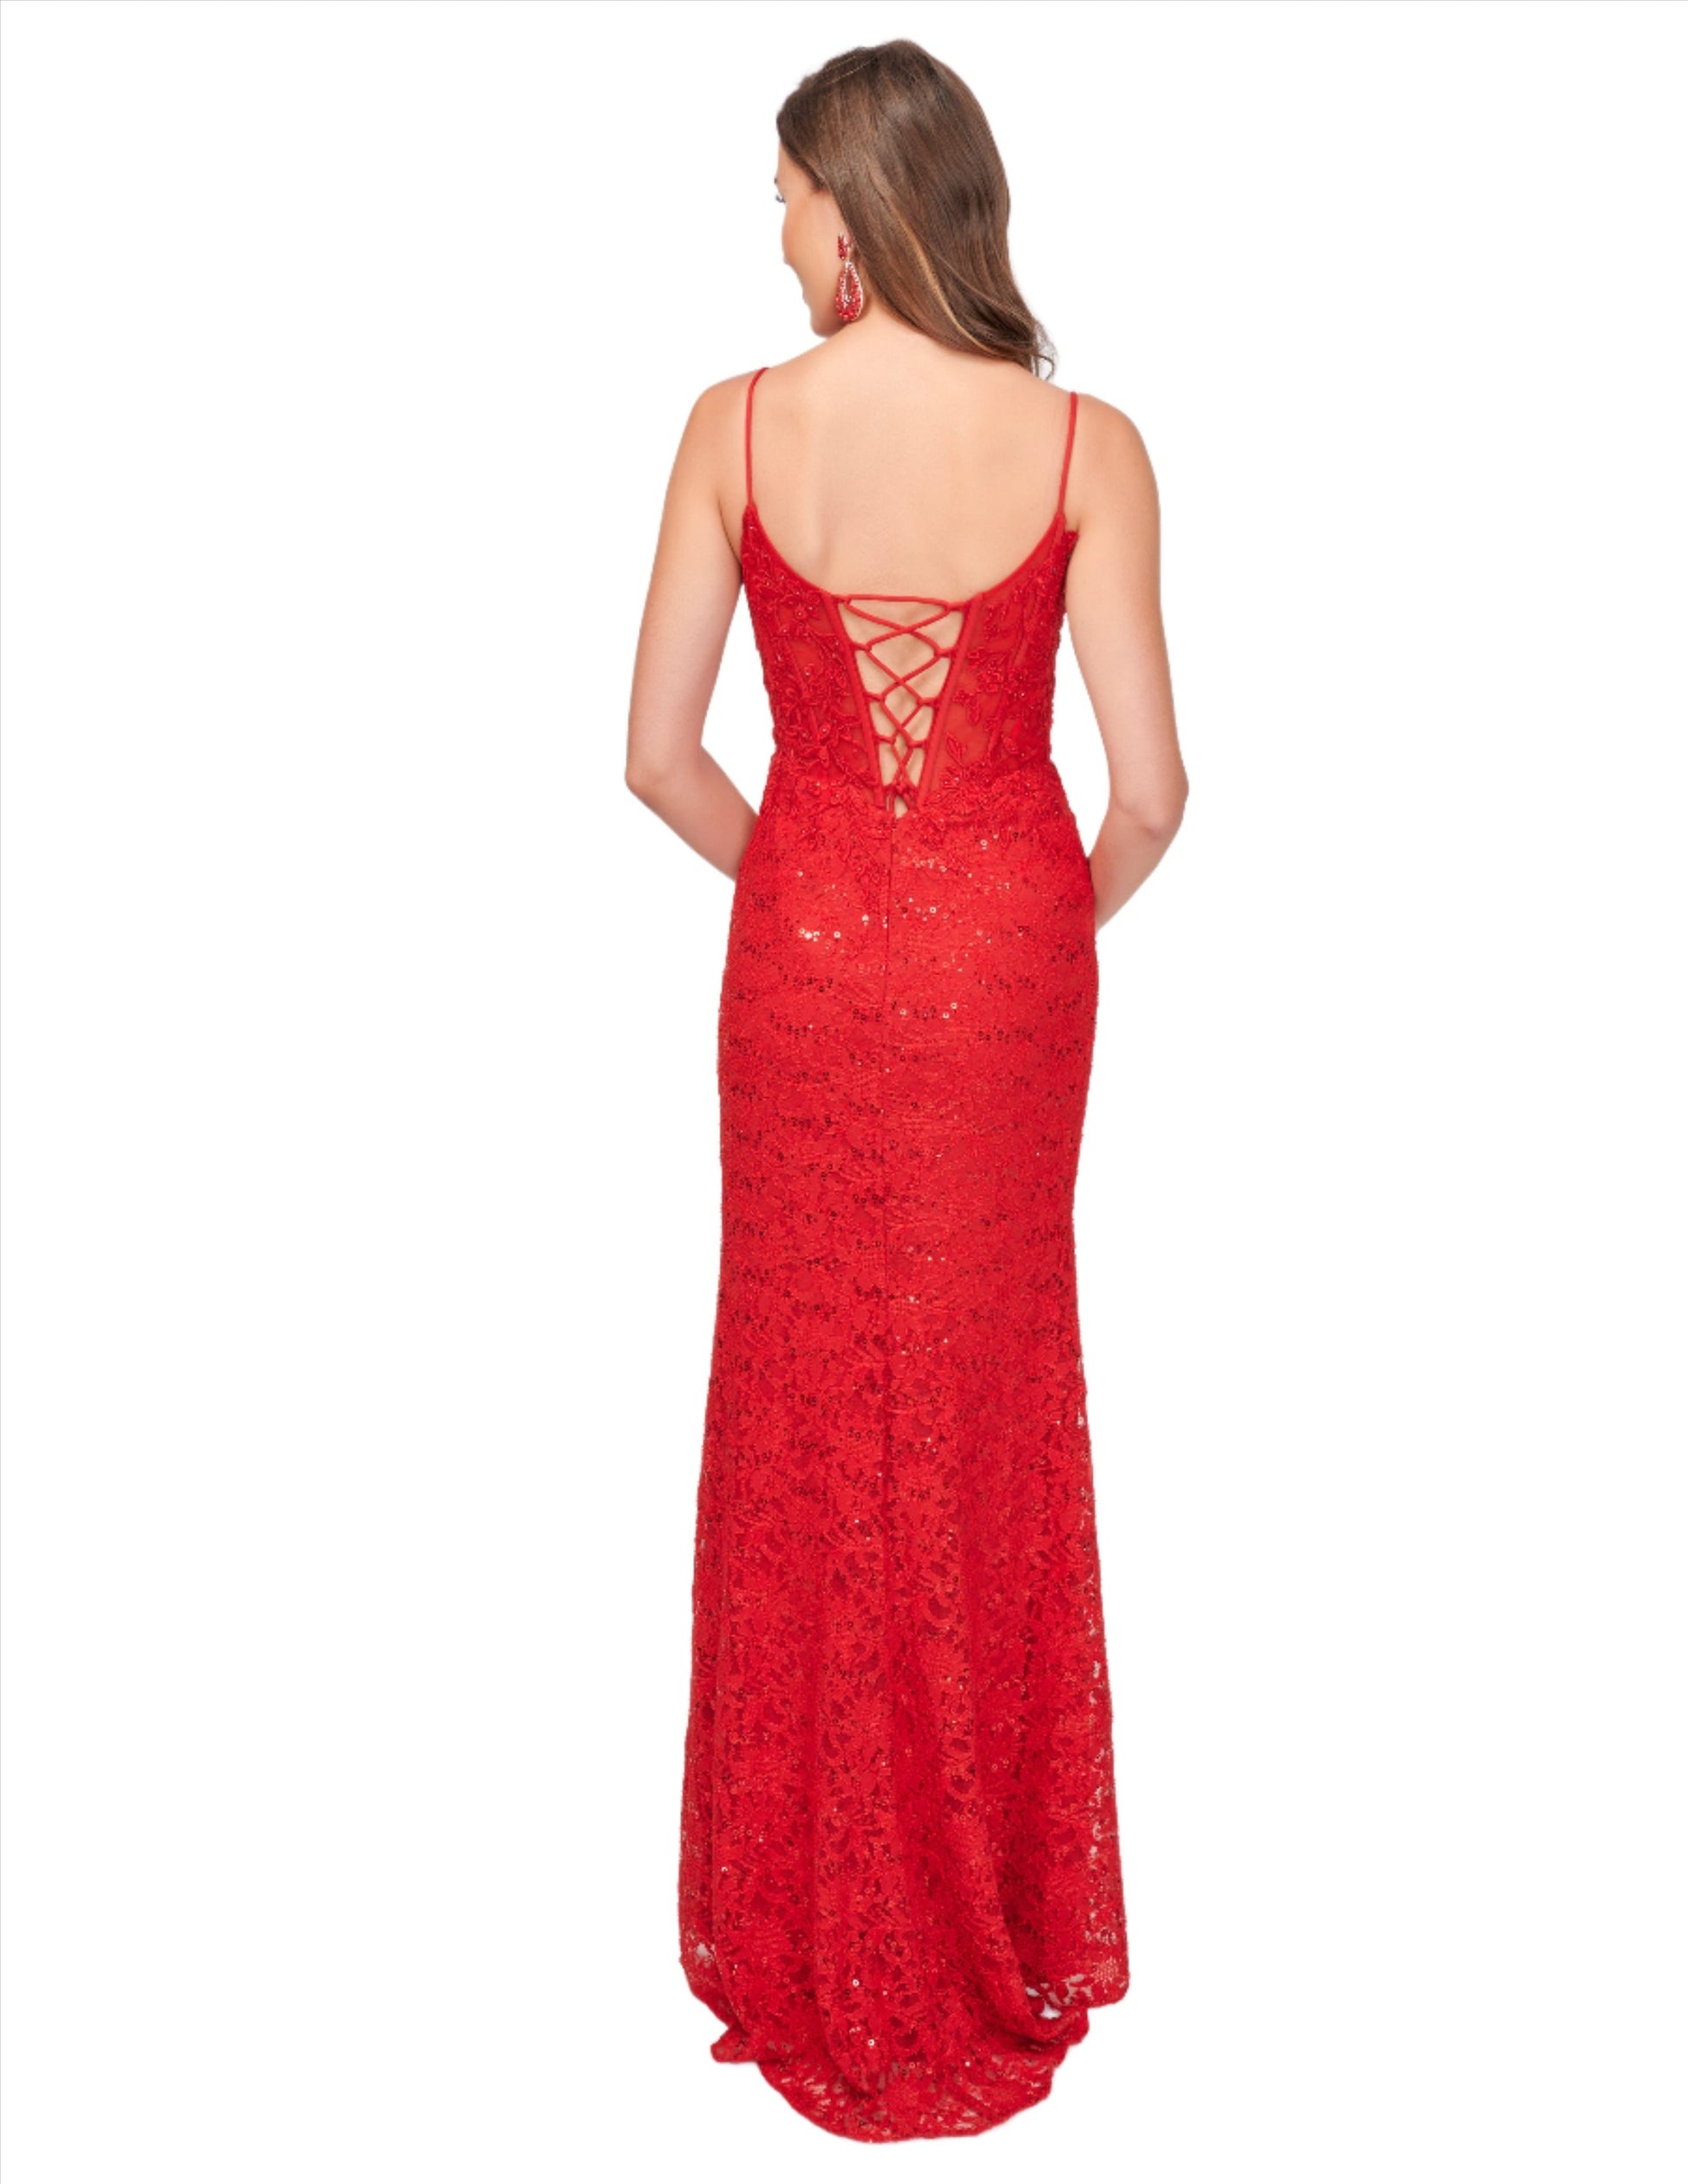 Elevate your evening look with the Nina Canacci 1568 formal dress. Featuring a sheer lace corset and a striking sequin crystal V neck, this dress exudes elegance and sophistication. The corset detail cinches the waist for a flattering silhouette, while the slit adds a touch of sultry appeal. Perfect for prom or any formal event.